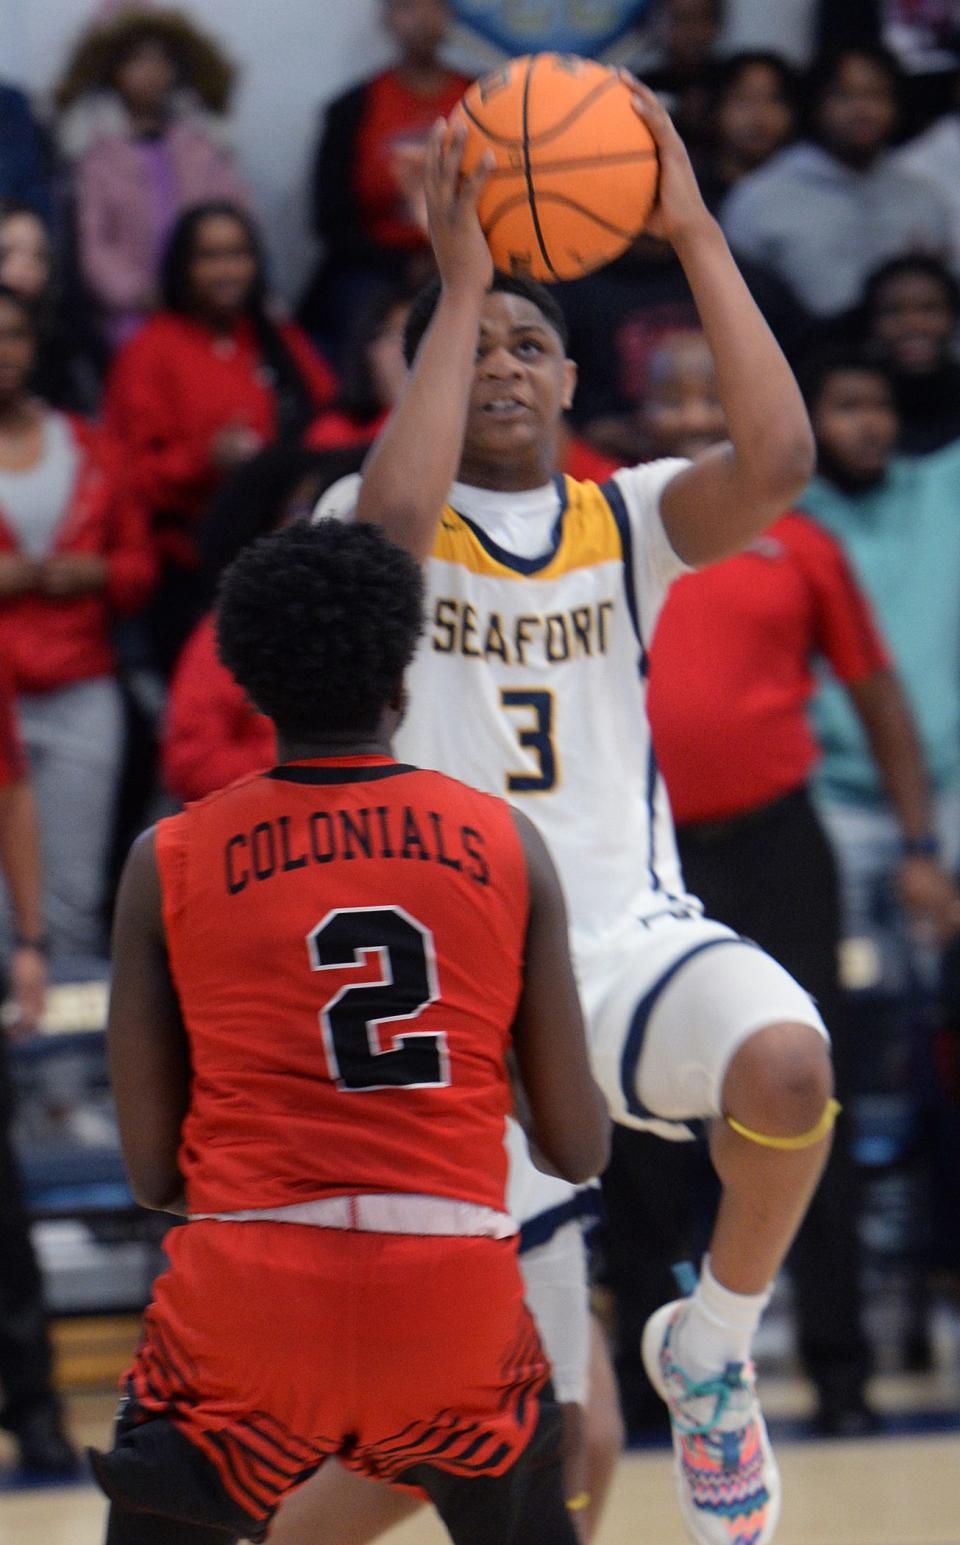 Seaford's Kashmier Wise shoots over Michael Wilmore of William Penn.